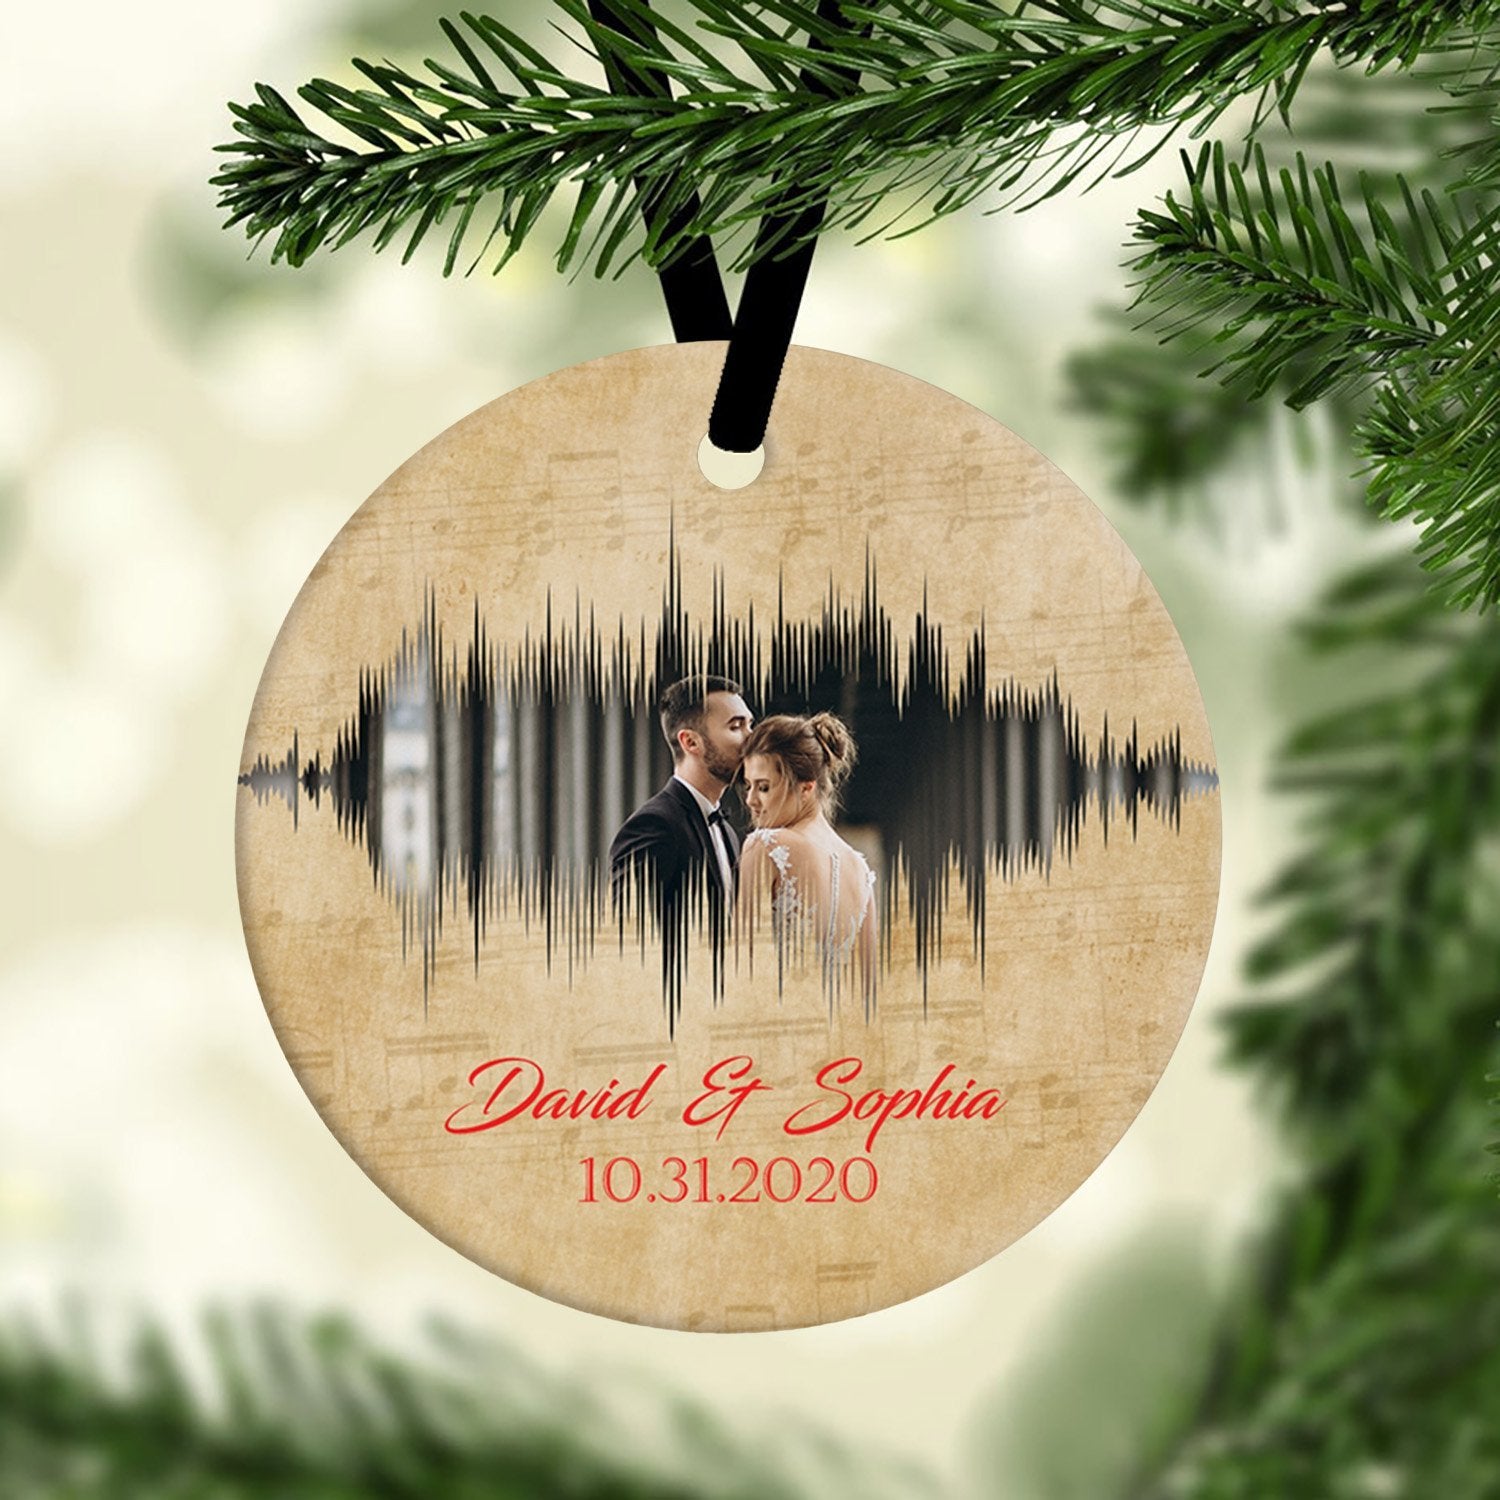 Your unique artwork, pictures, or slogans are vibrantly printed on both sides of the circular circle ornament.